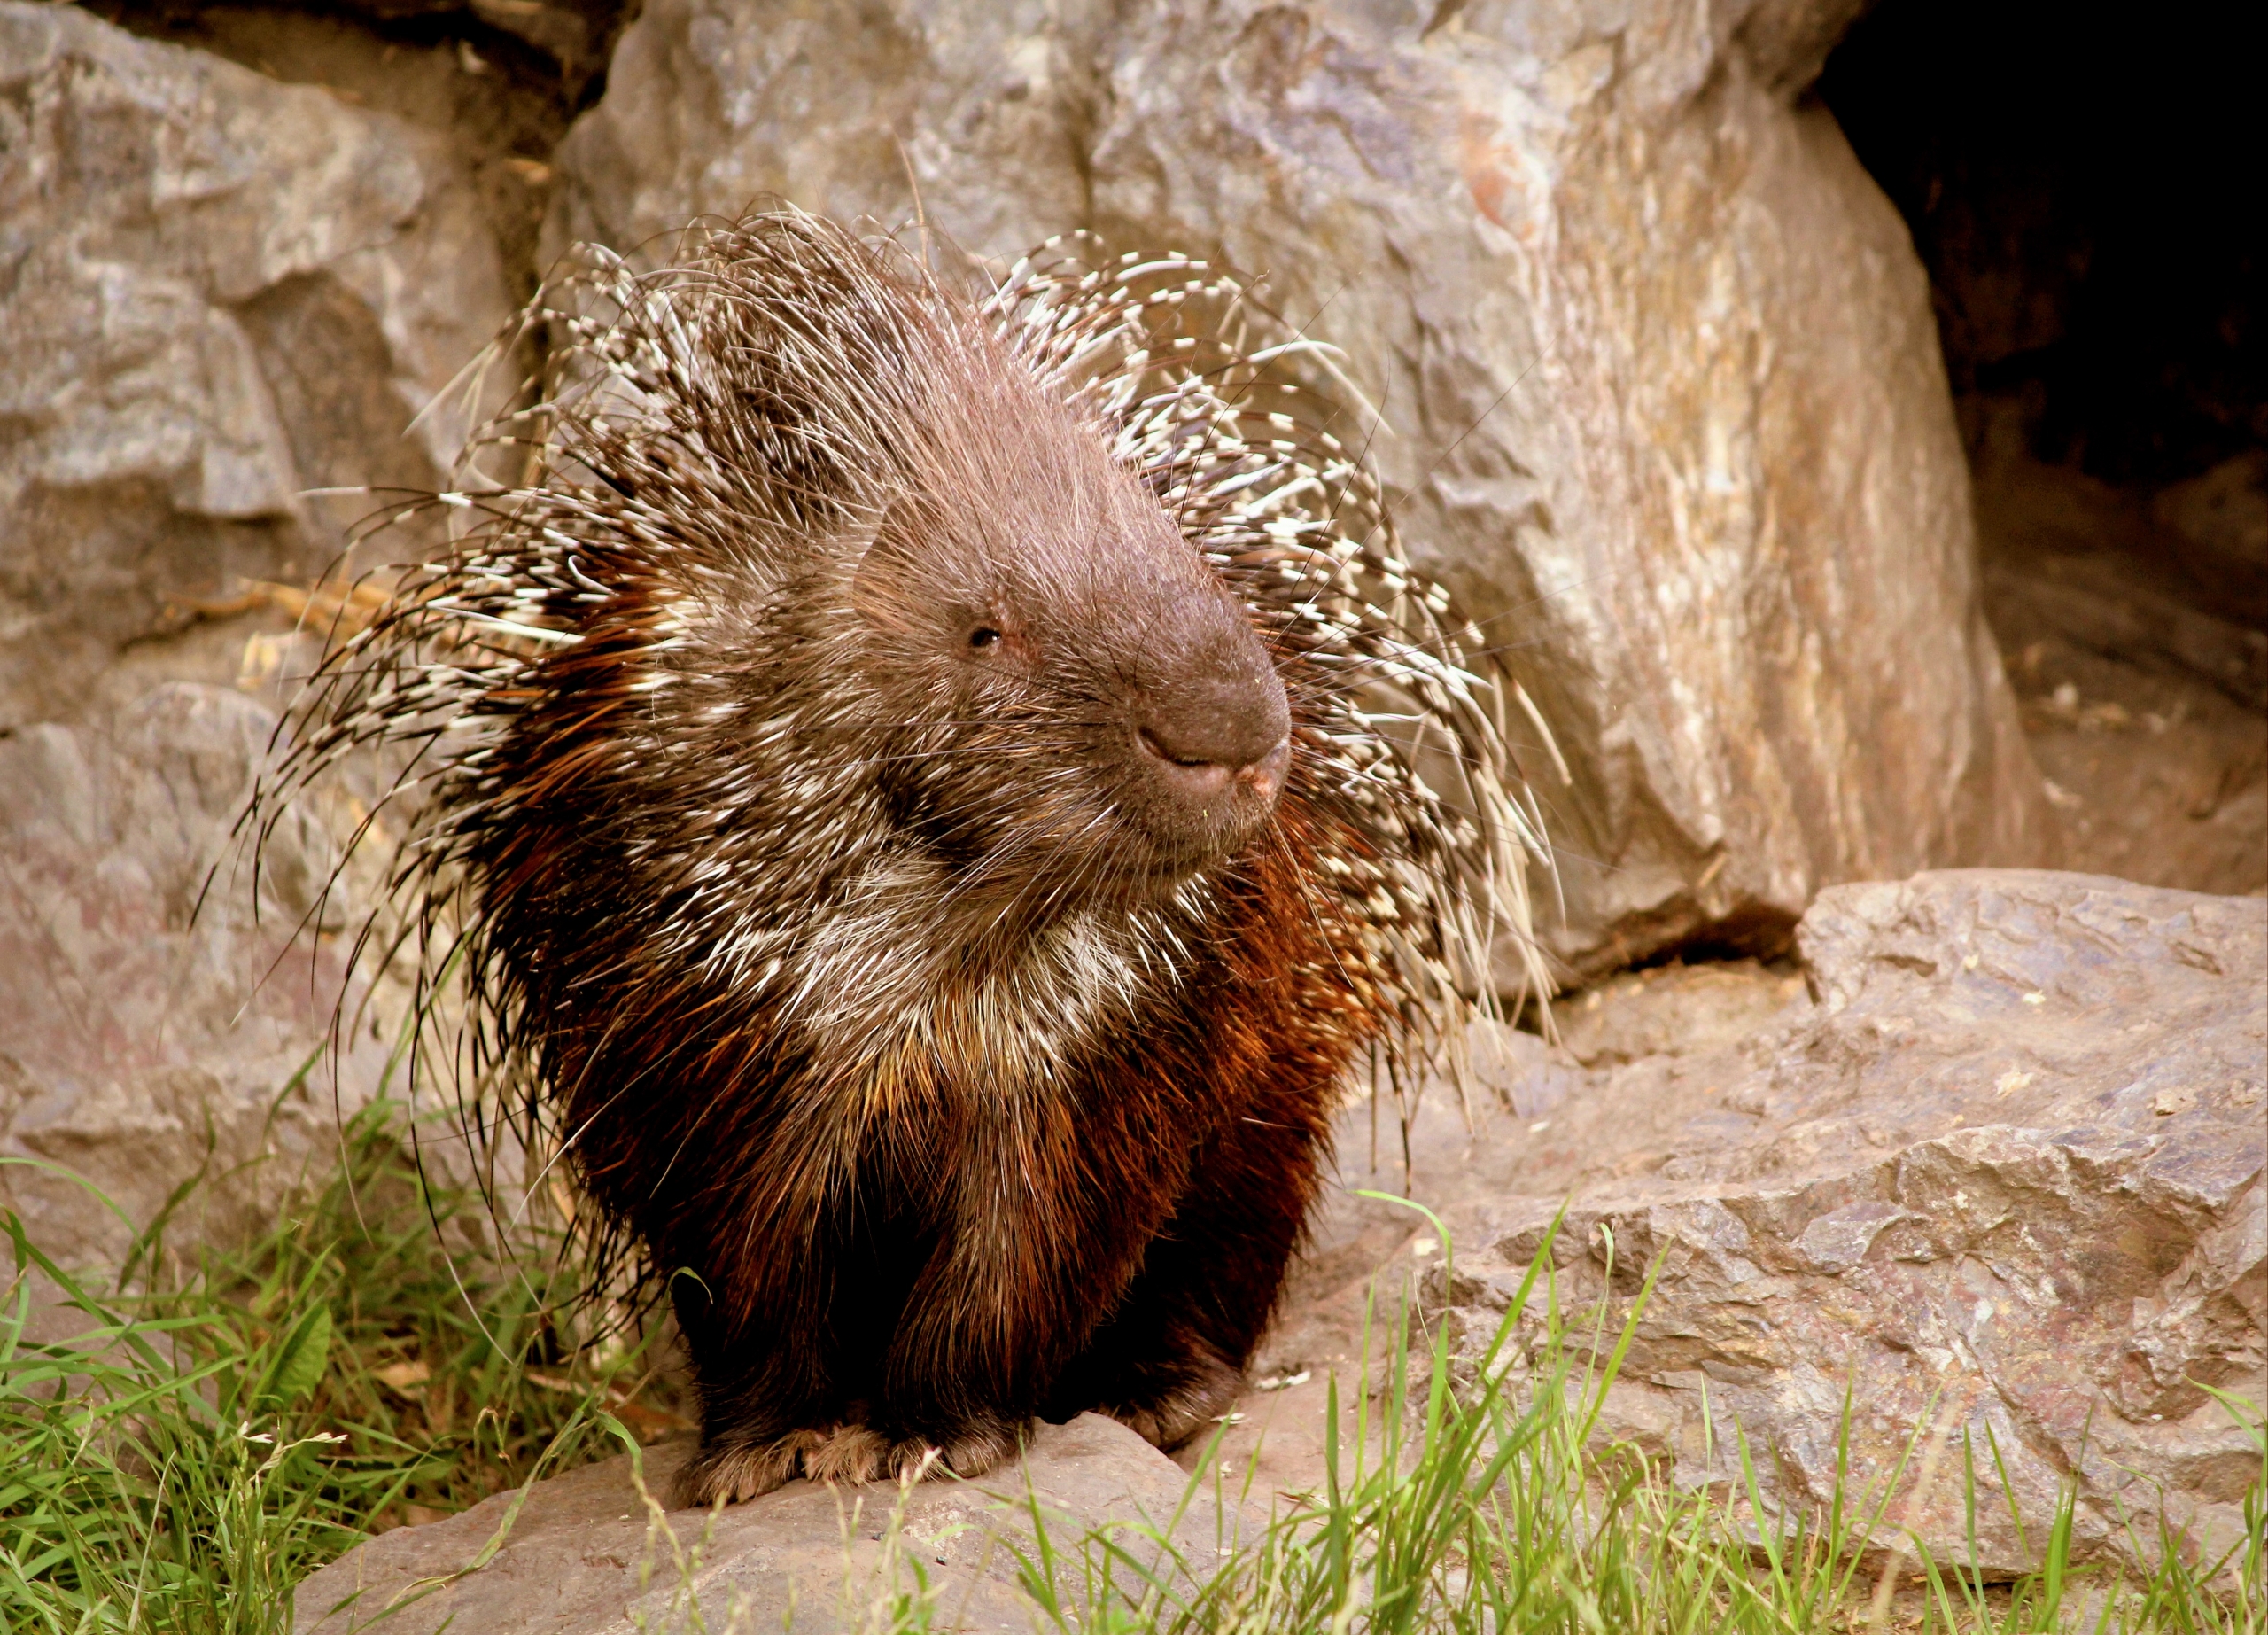 Native to northern Appalachia, porcupines have been slowly migrating south into West Virginia.